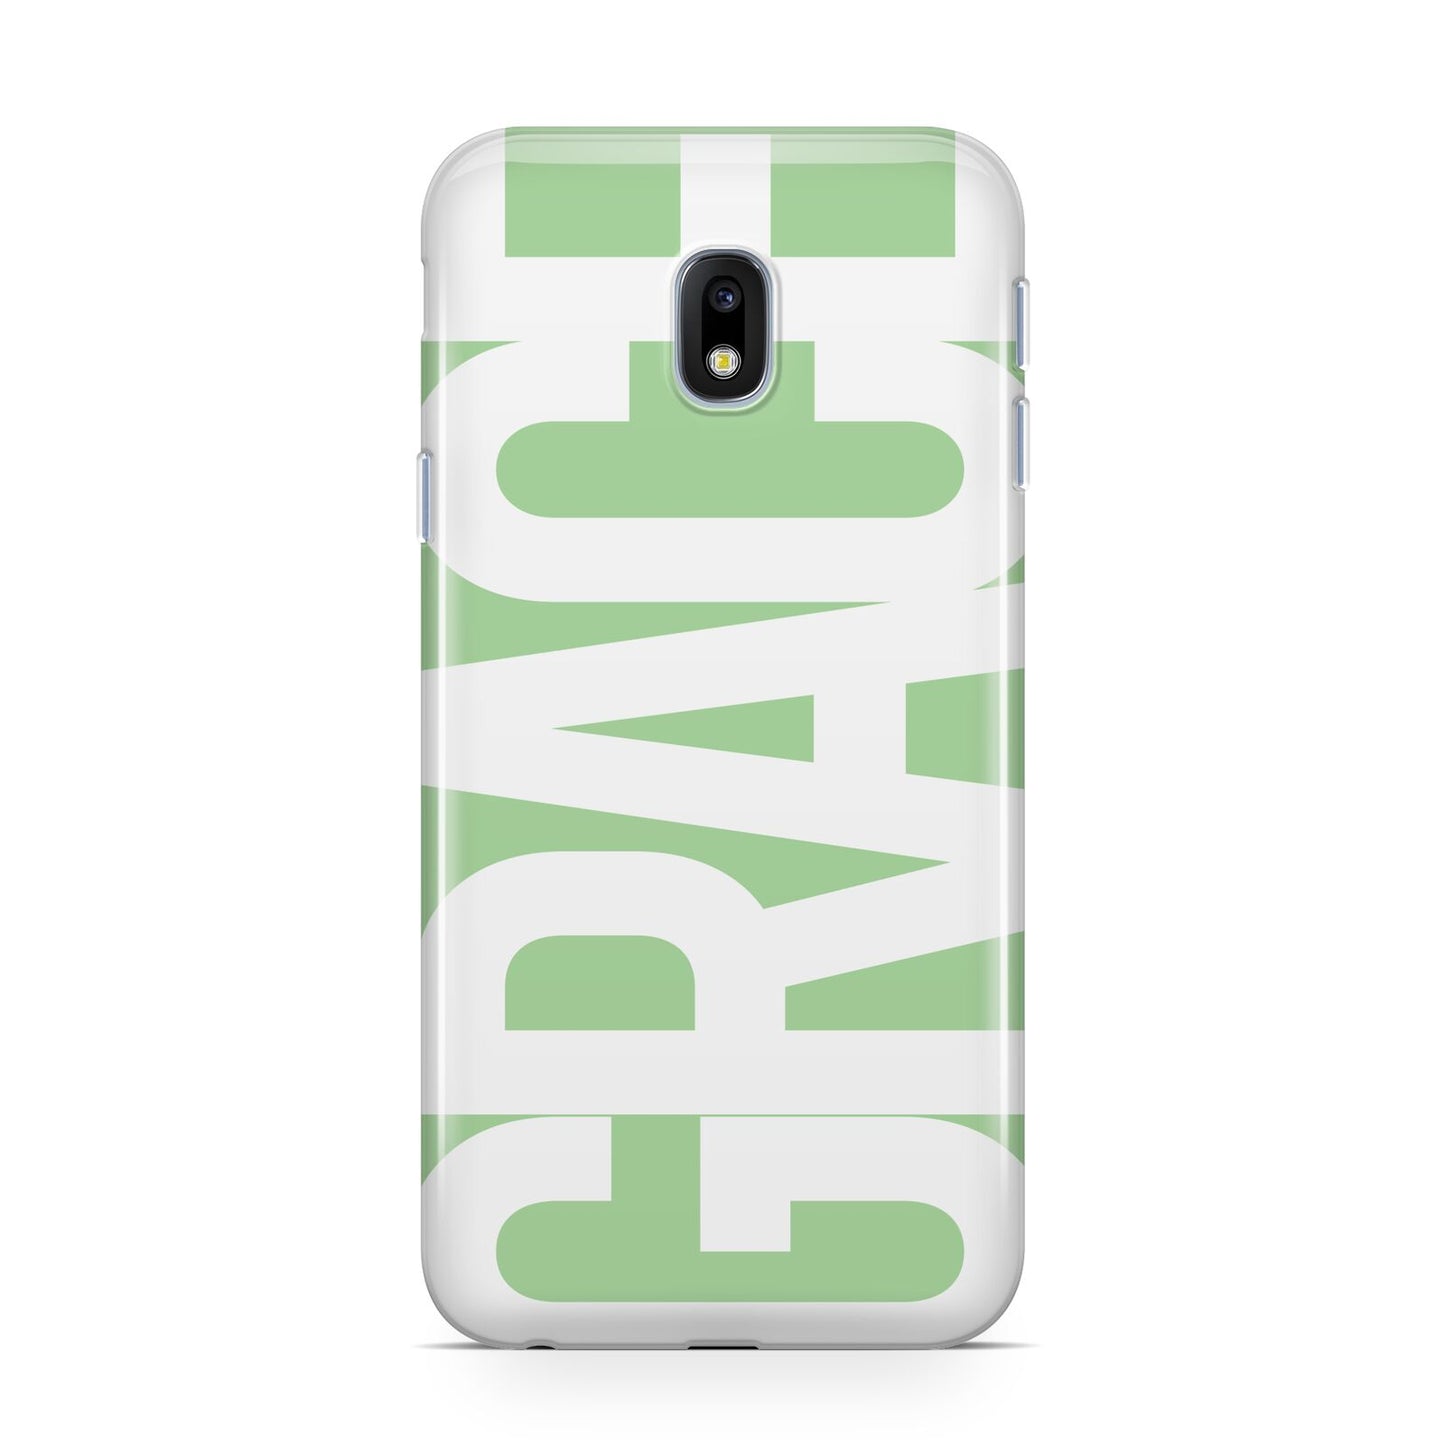 Pale Green with Bold White Text Samsung Galaxy J3 2017 Case